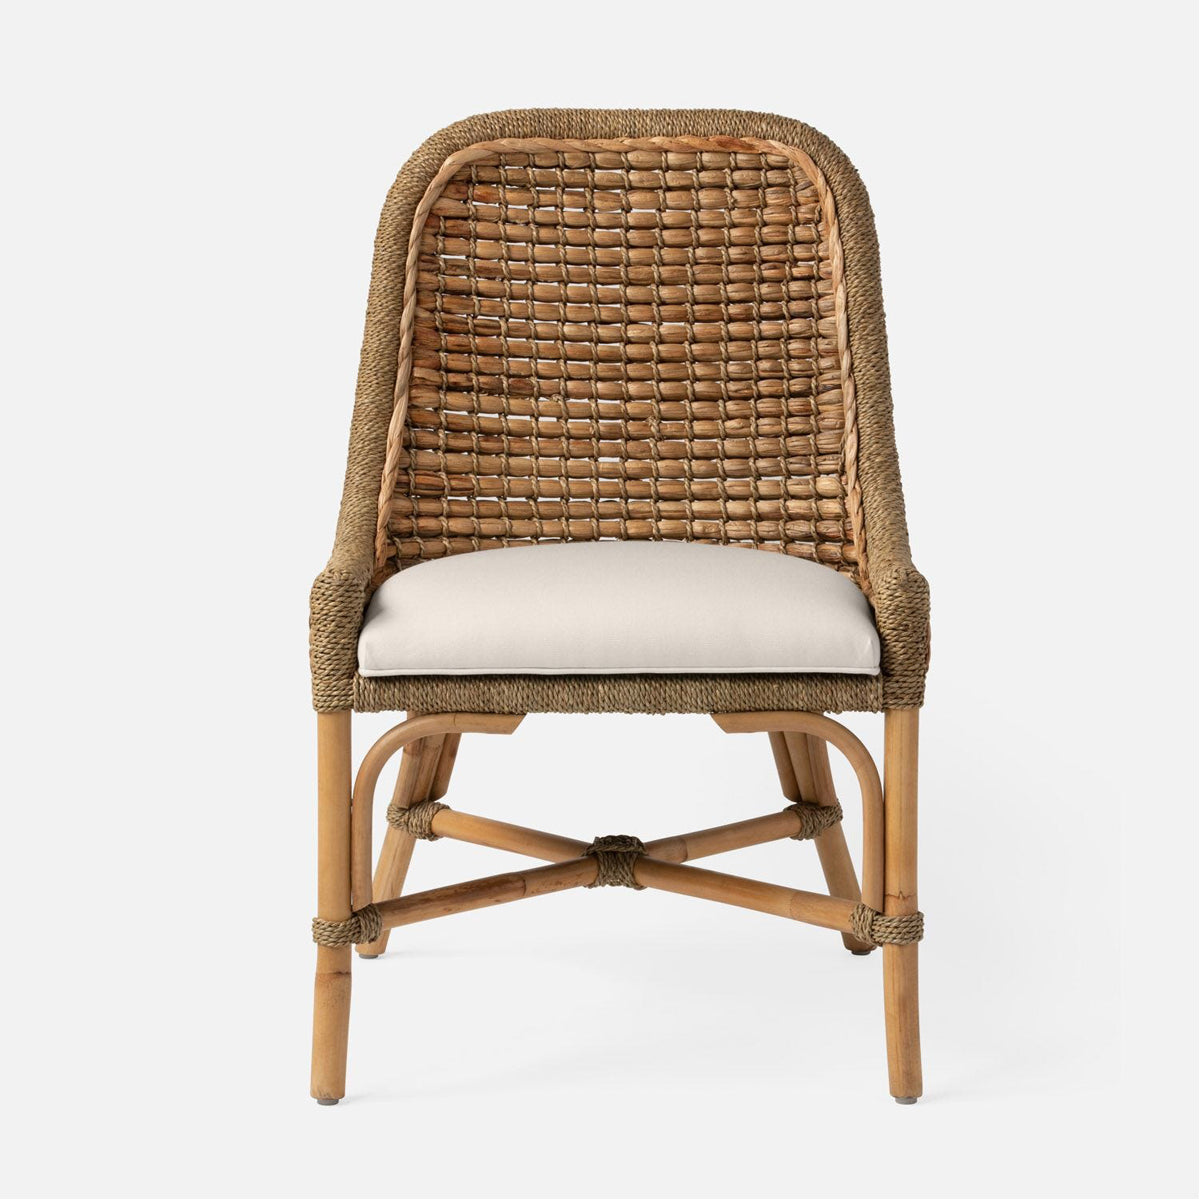 Made Goods Summer Water Hyacinth Dining Chair in Ettrick Cotton Jute